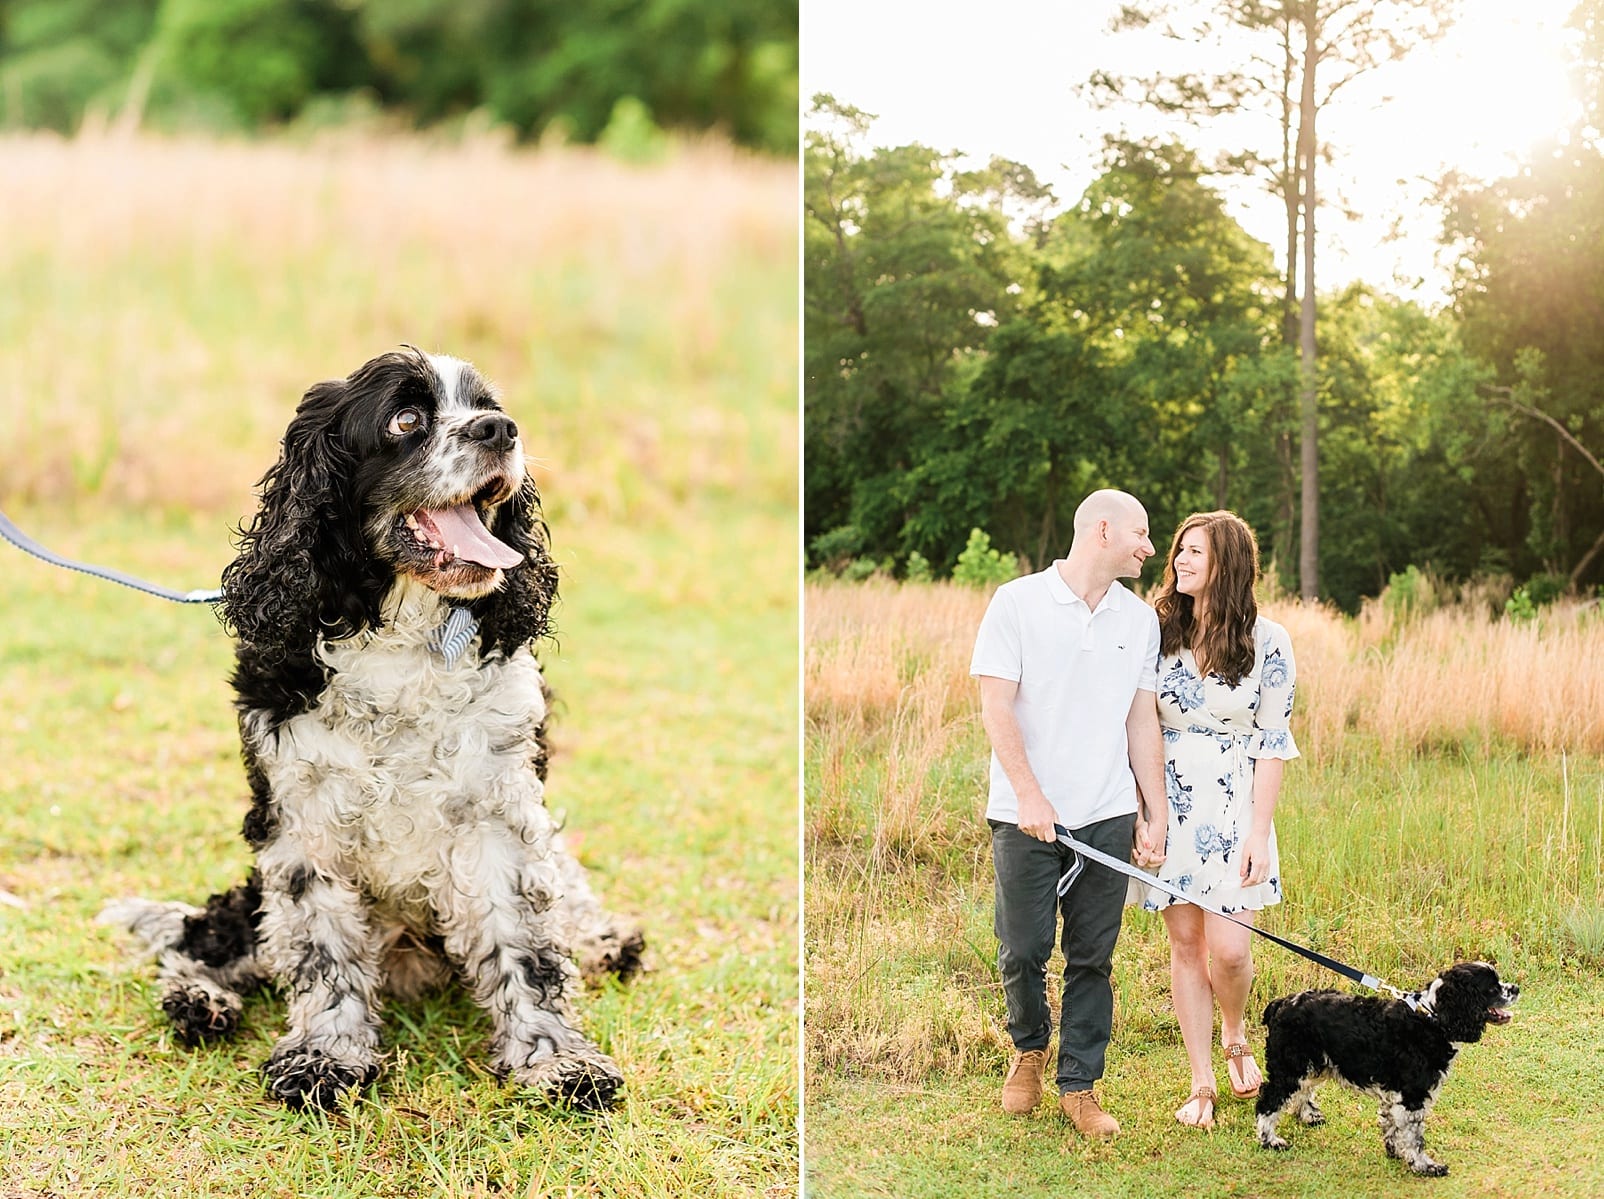 Wake Forest husband and wife walking their cocker spaniel photo